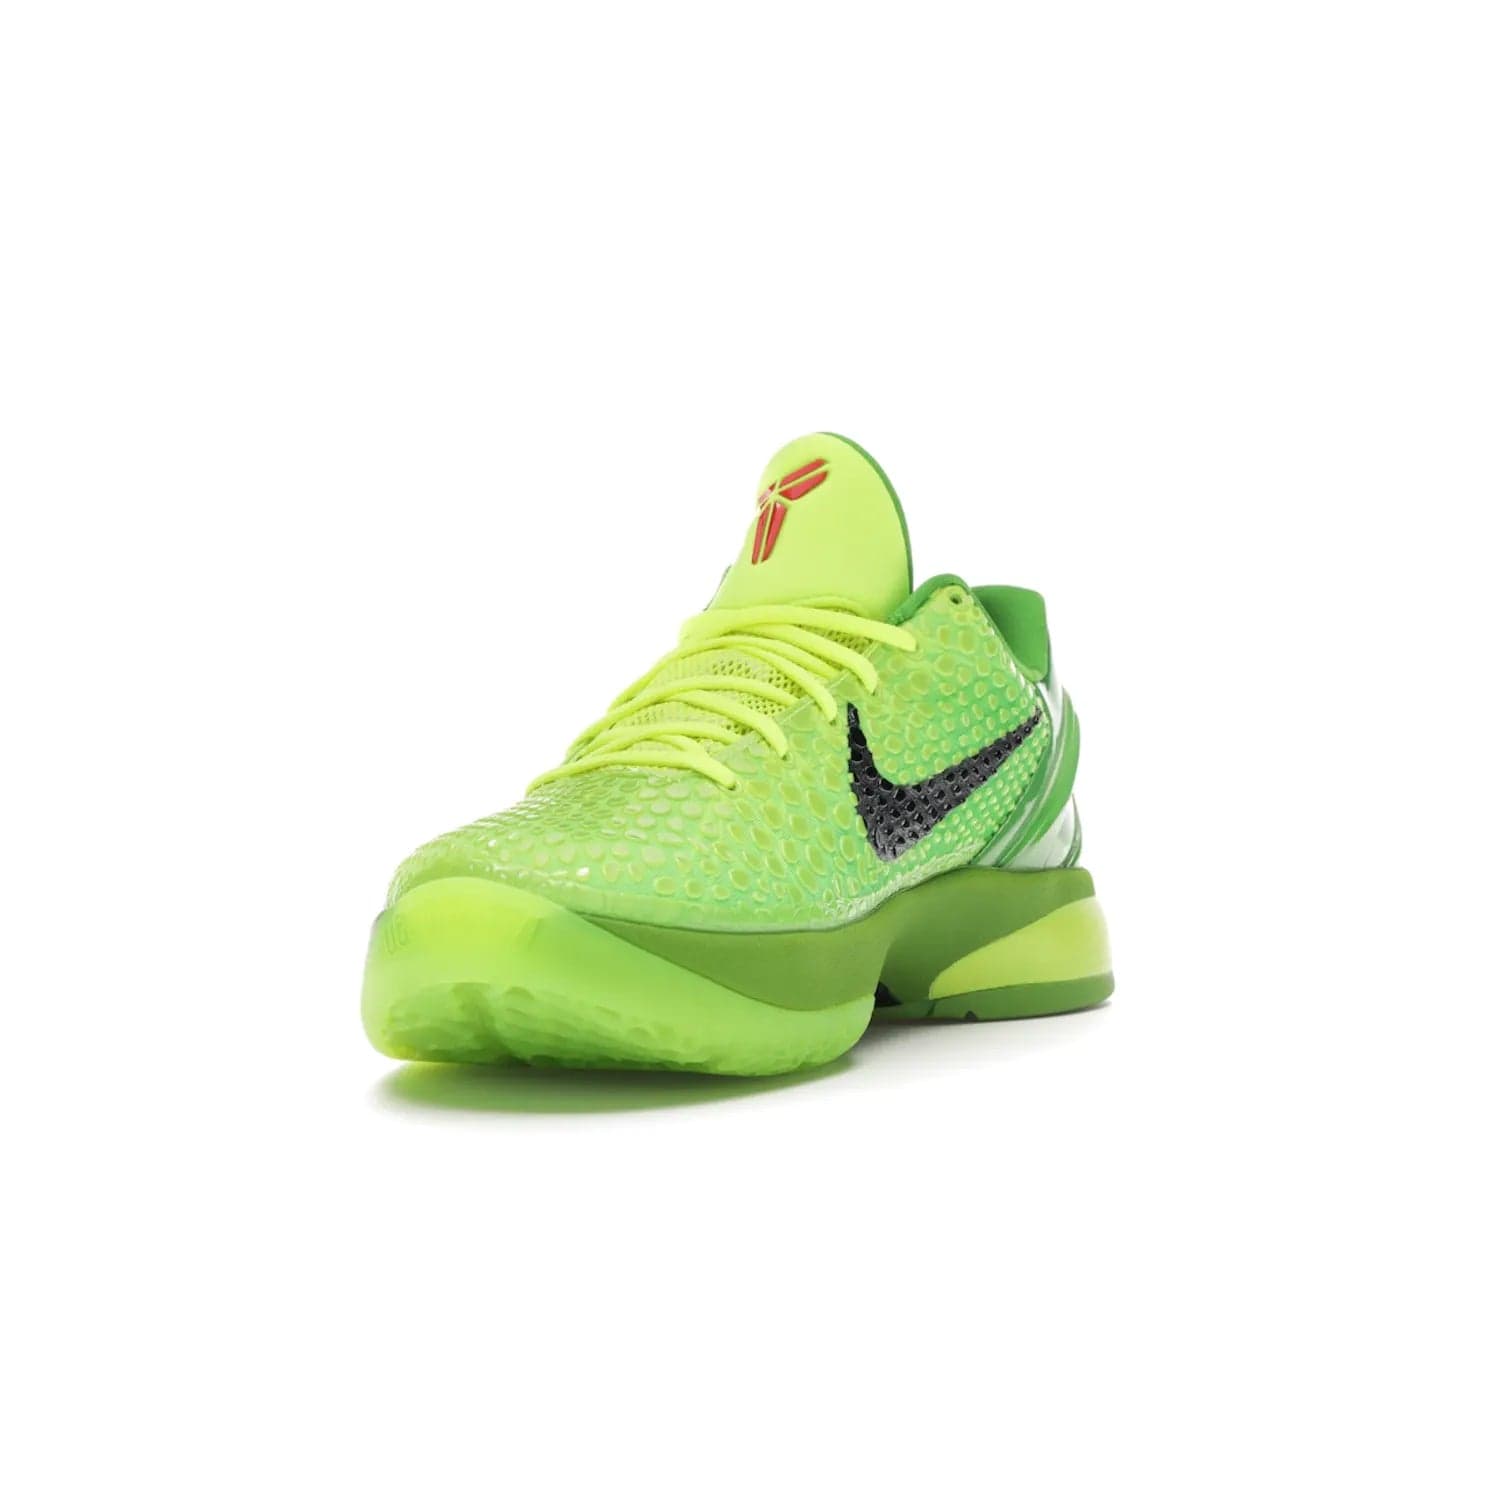 Nike Kobe 6 Protro Grinch (2020) - Image 13 - Only at www.BallersClubKickz.com - #
The Nike Kobe 6 Protro Grinch updates the iconic 2011 design with modern tech like a Zoom Air cushioning system, scaled-down traction, and updated silhouette. Experience the textured Green Apple and Volt upper plus bright red and green accents for $180.